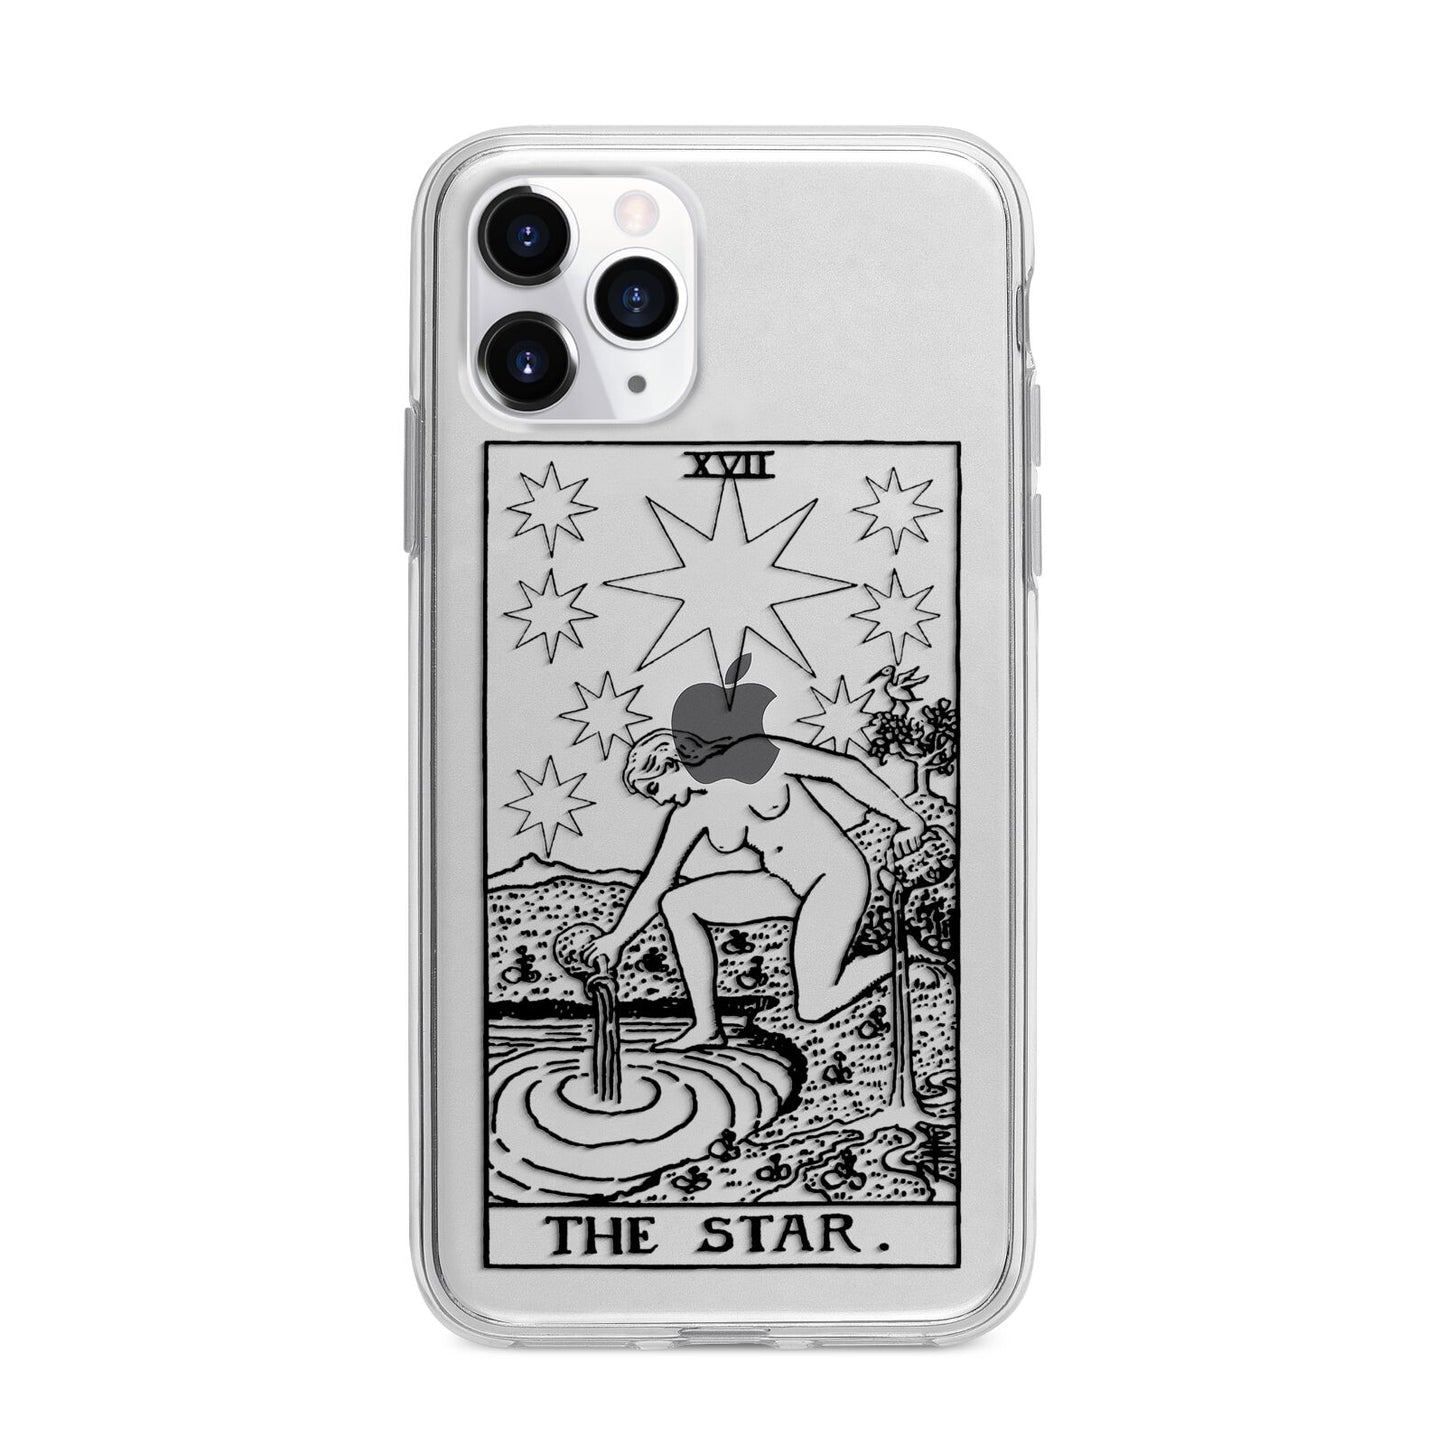 The Star Monochrome Tarot Card Apple iPhone 11 Pro in Silver with Bumper Case